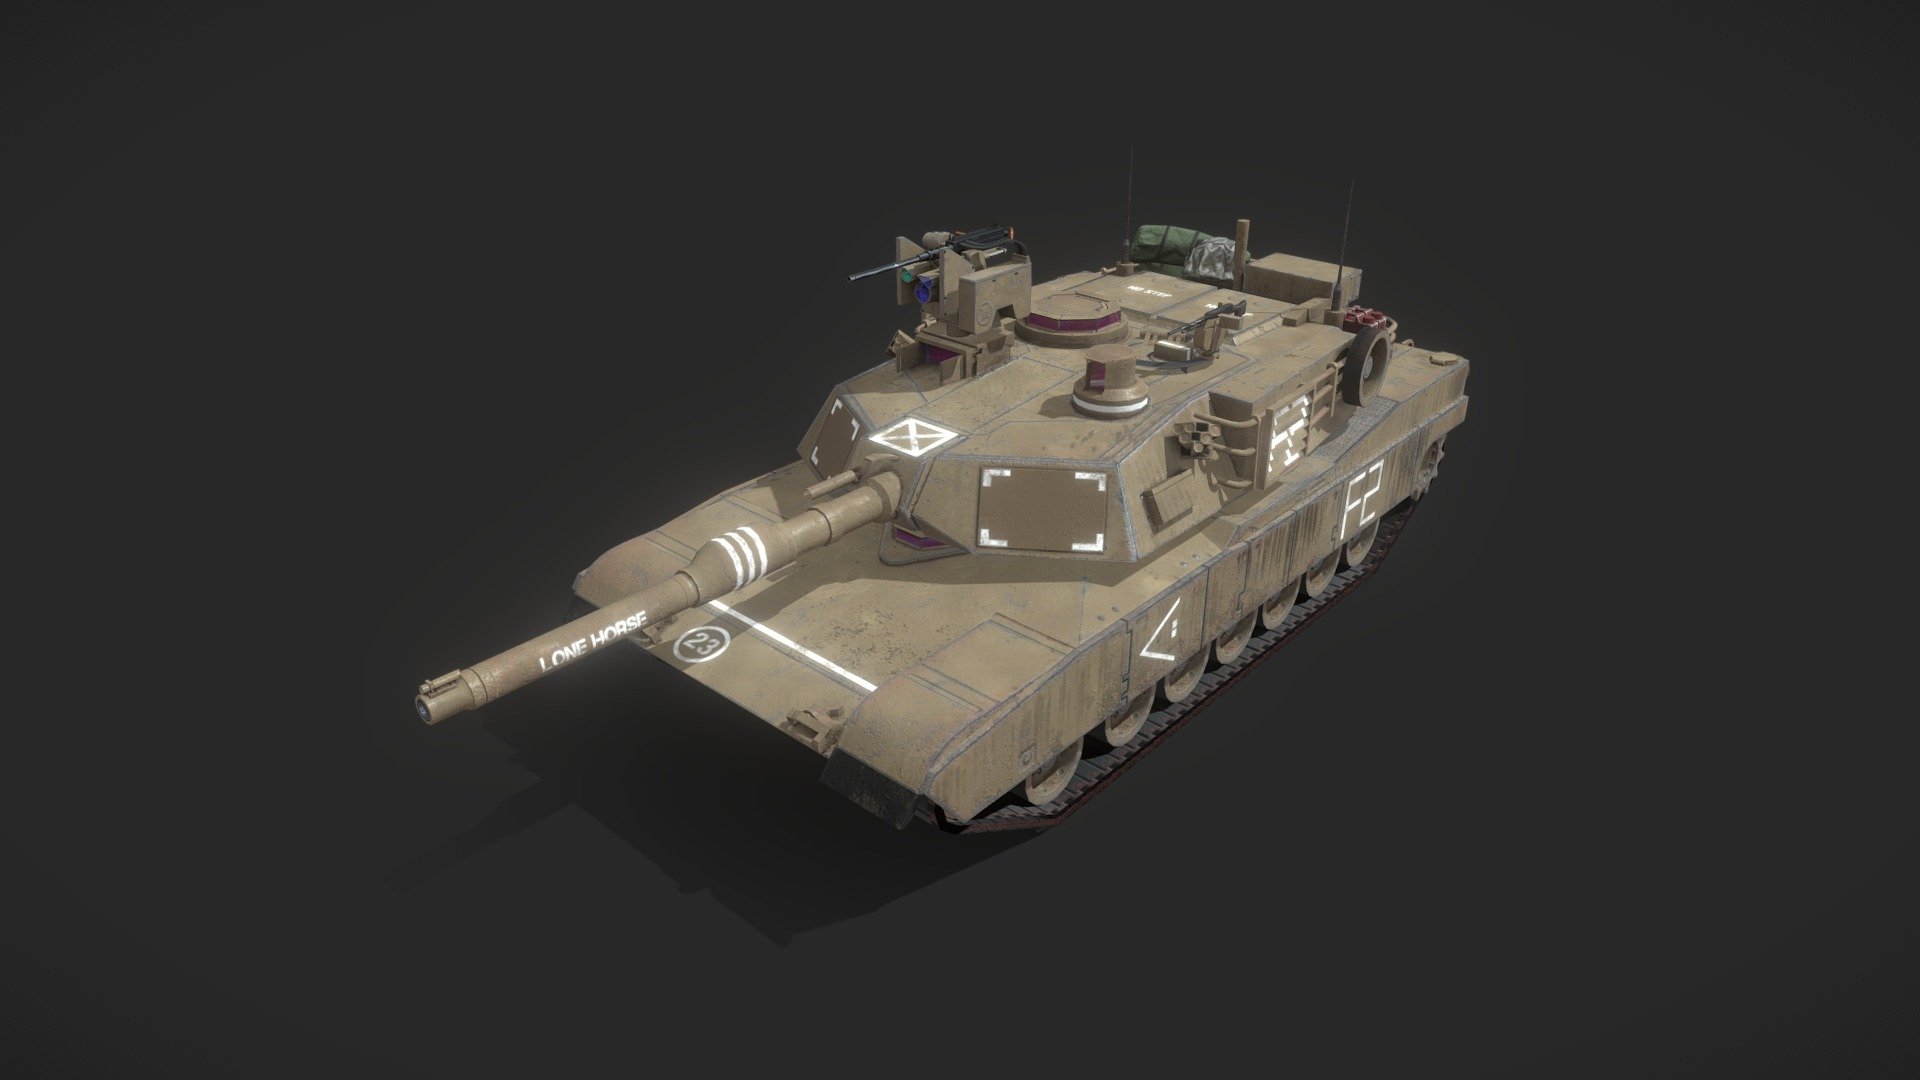 Low-poly model of the US M1A2 Abrams SEP v3 main battle tank. Accurately done as close to original as possible 3d model